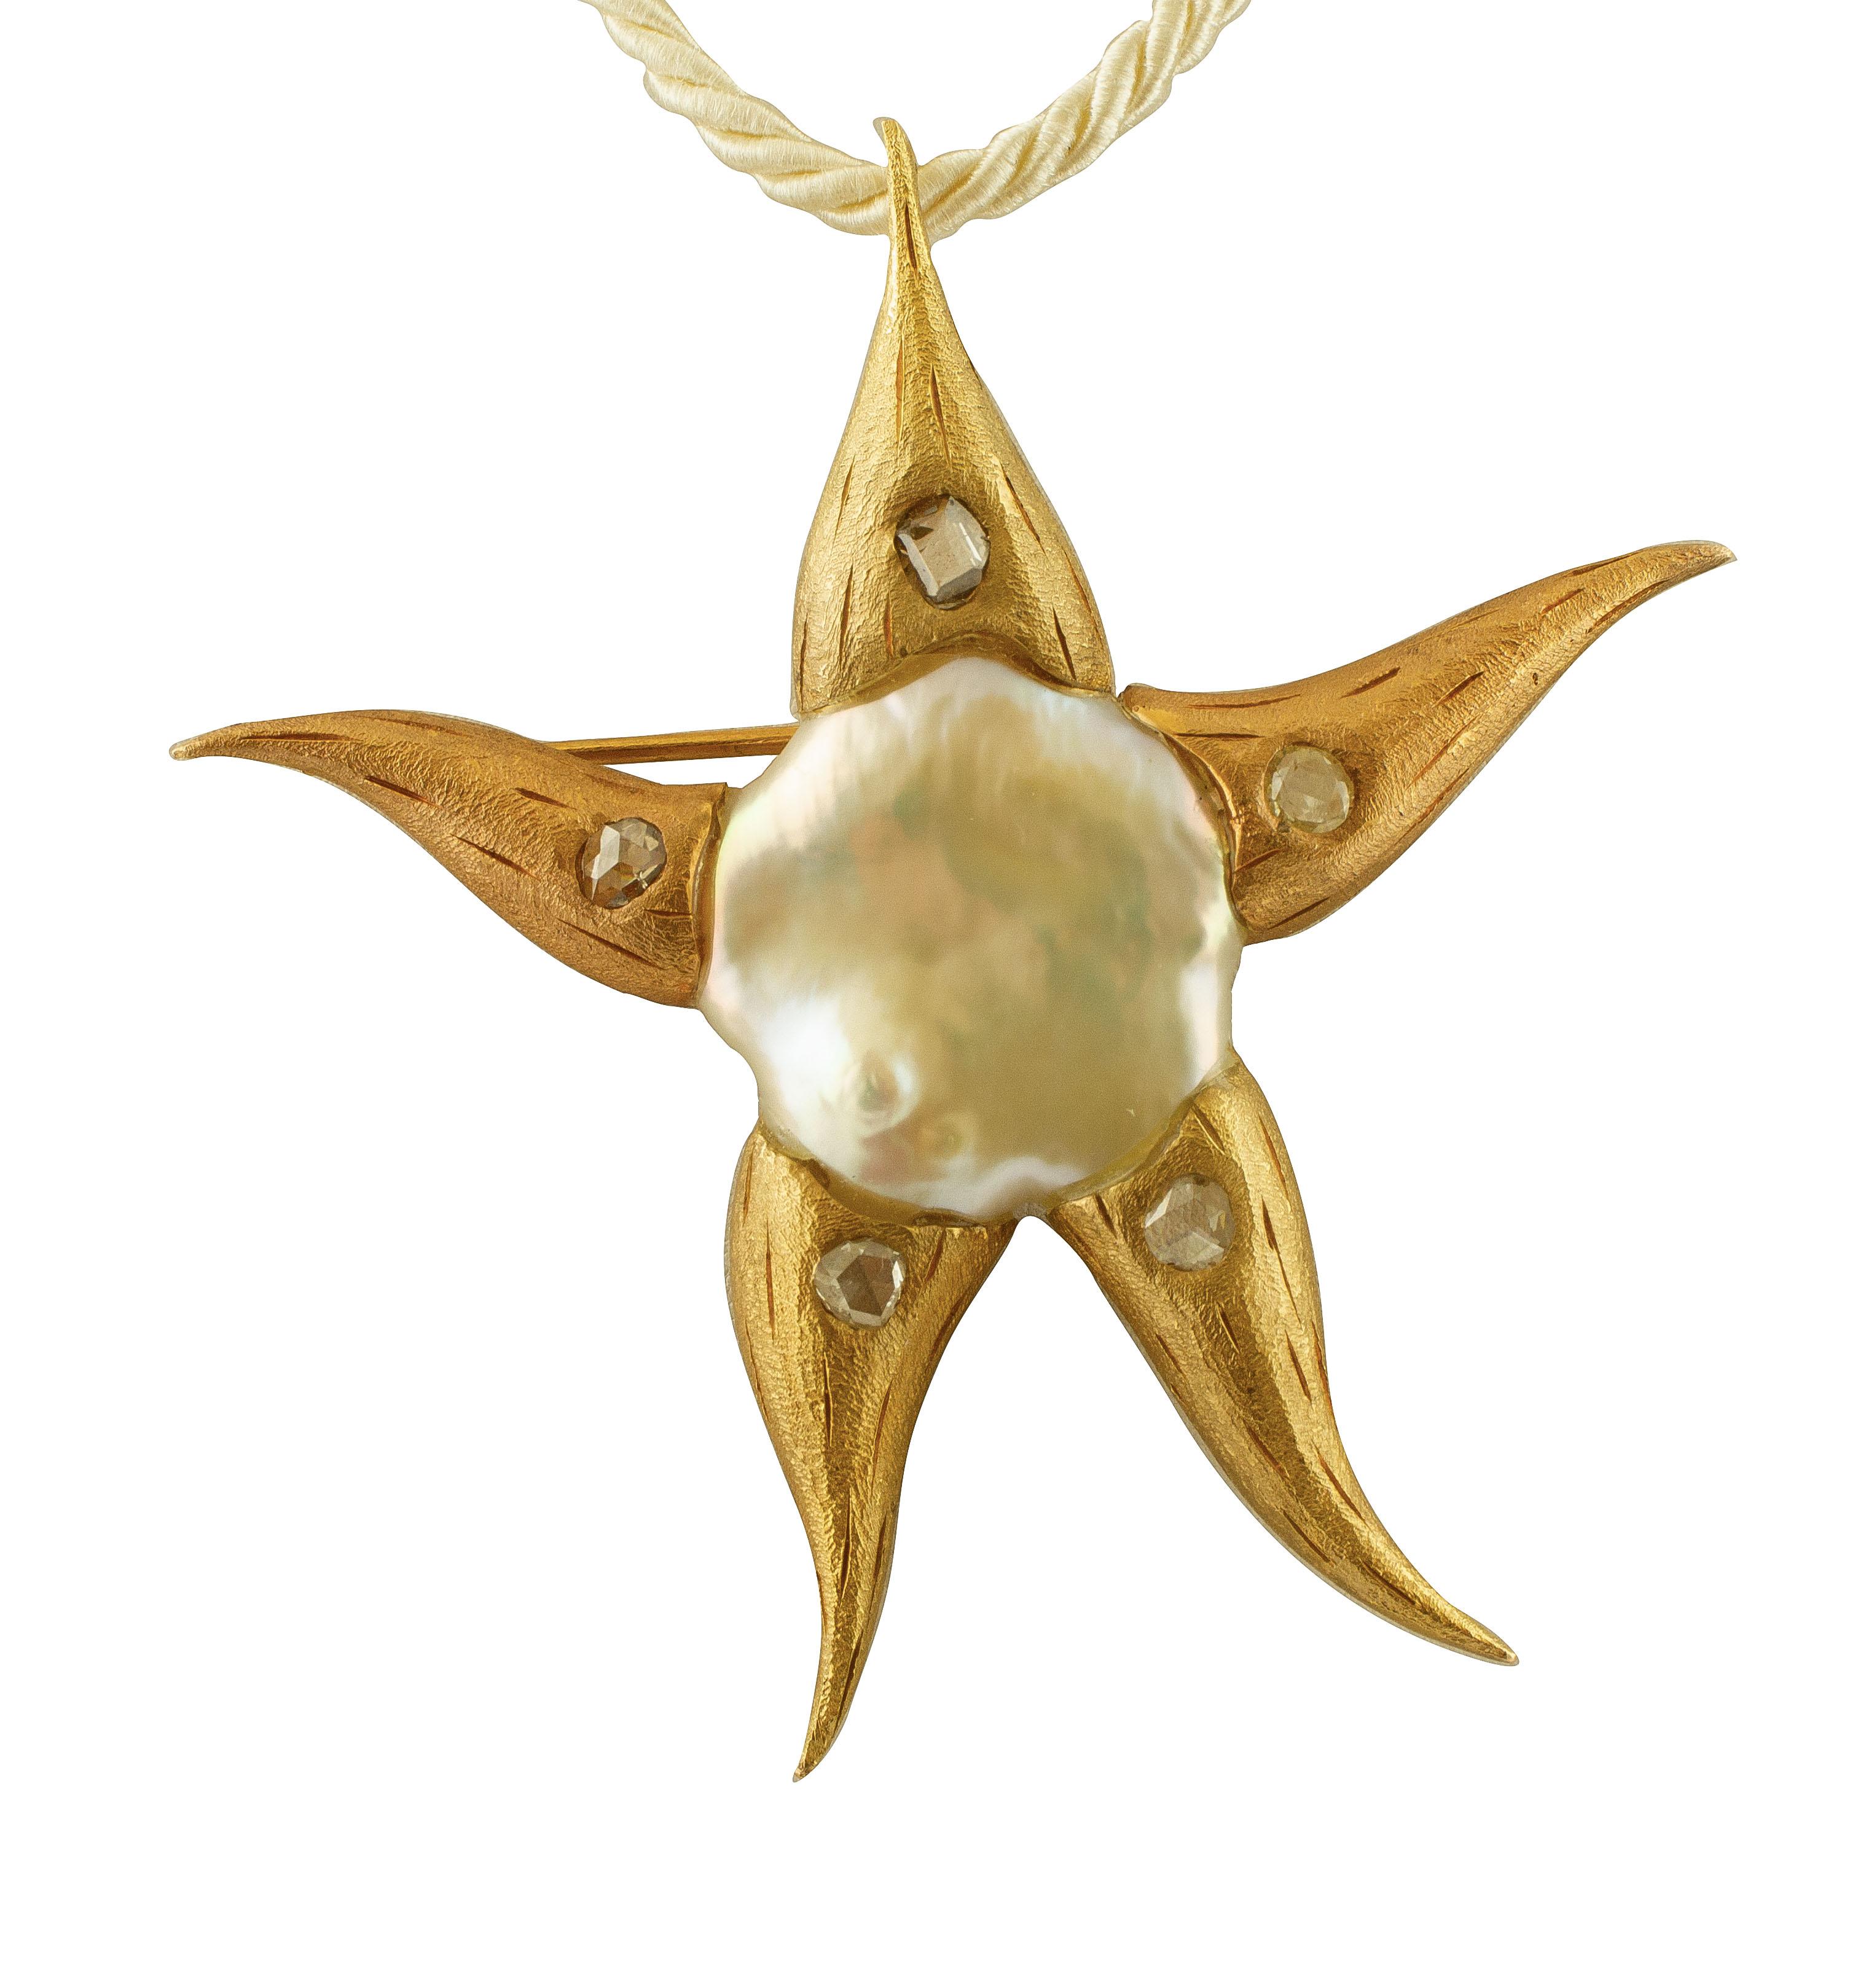 SHIPPING POLICY:
No additional costs will be added to this order.
Shipping costs will be totally covered by the seller (customs duties included).

For any inquiries,please contact the seller through the message center.

Starfish shaped brooch in 9Kt